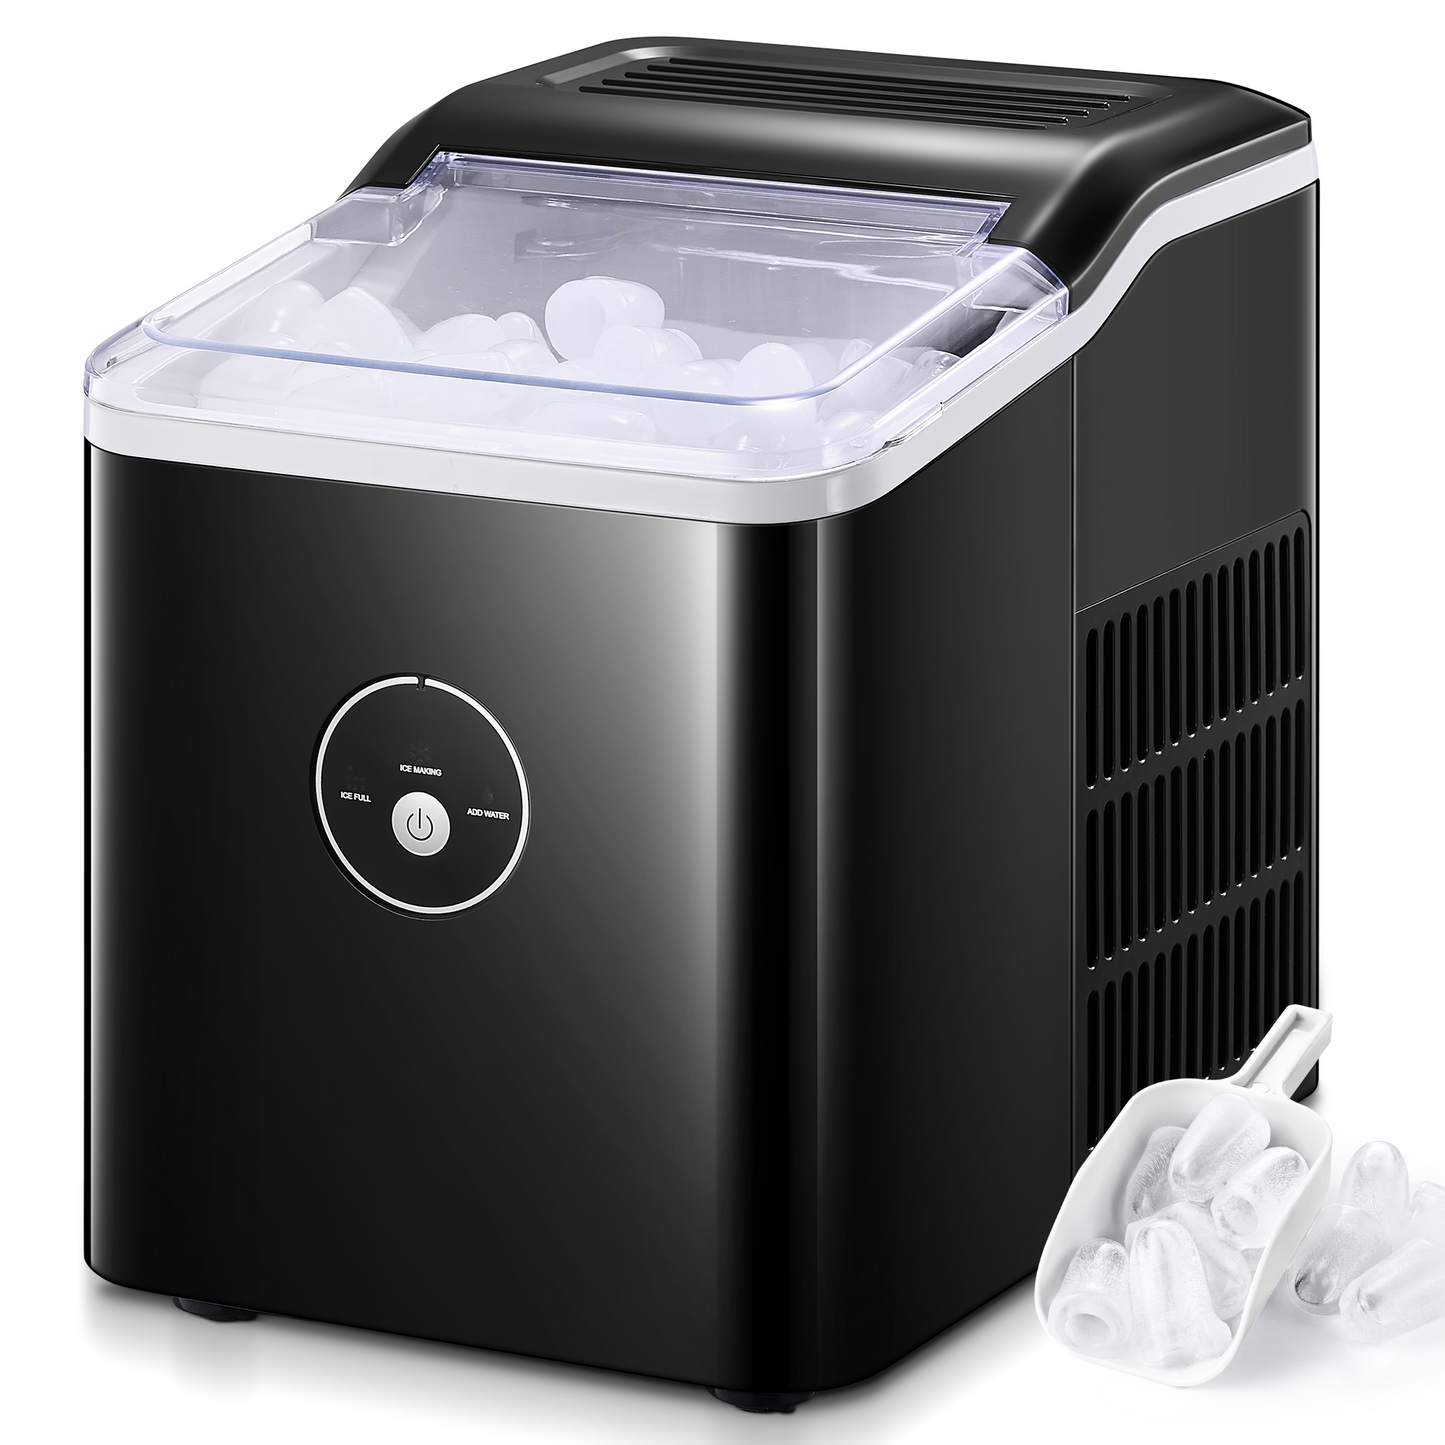 Ice Maker Countertop, 28 Lbs. Ice In 24 Hrs, 9 Ice Cubes Ready In 5 Minutes, Portable Ice Maker Machine 2L With Led Display Perfect For Parties Mixed Drinks, Ice Scoop And Basket (Black)